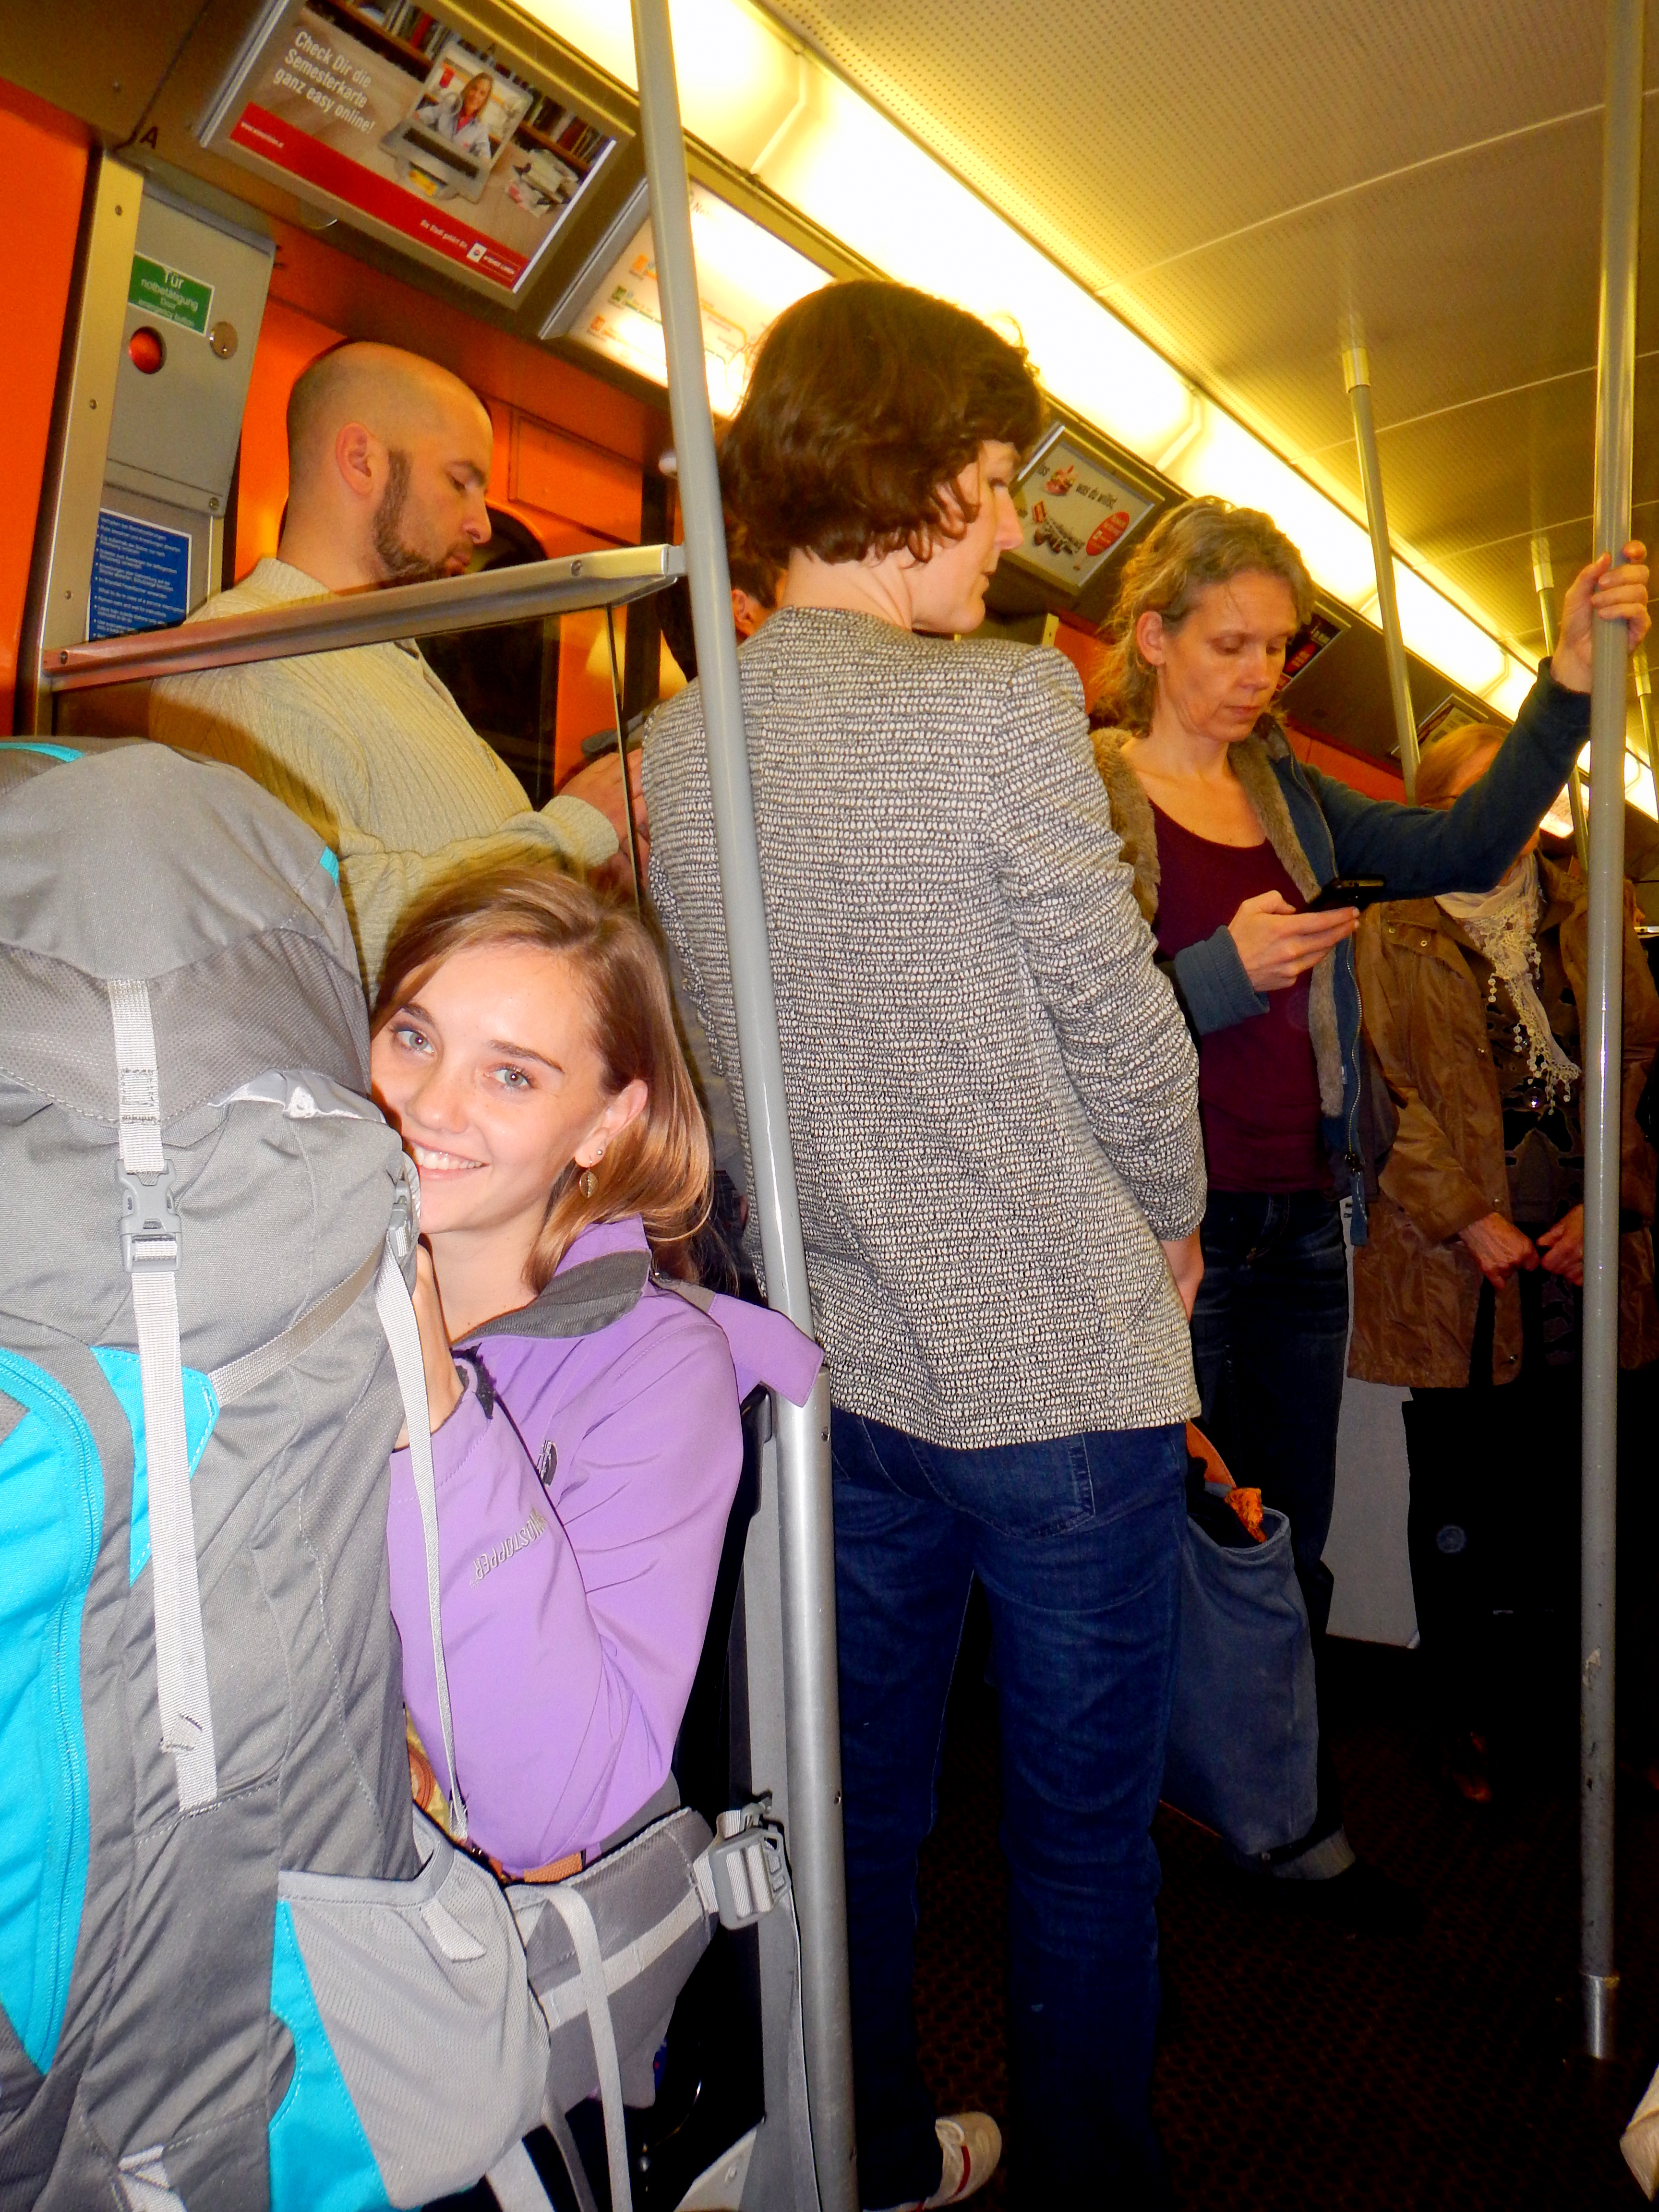 Rush hour on the subway, and we've got giant backpacks, Austria